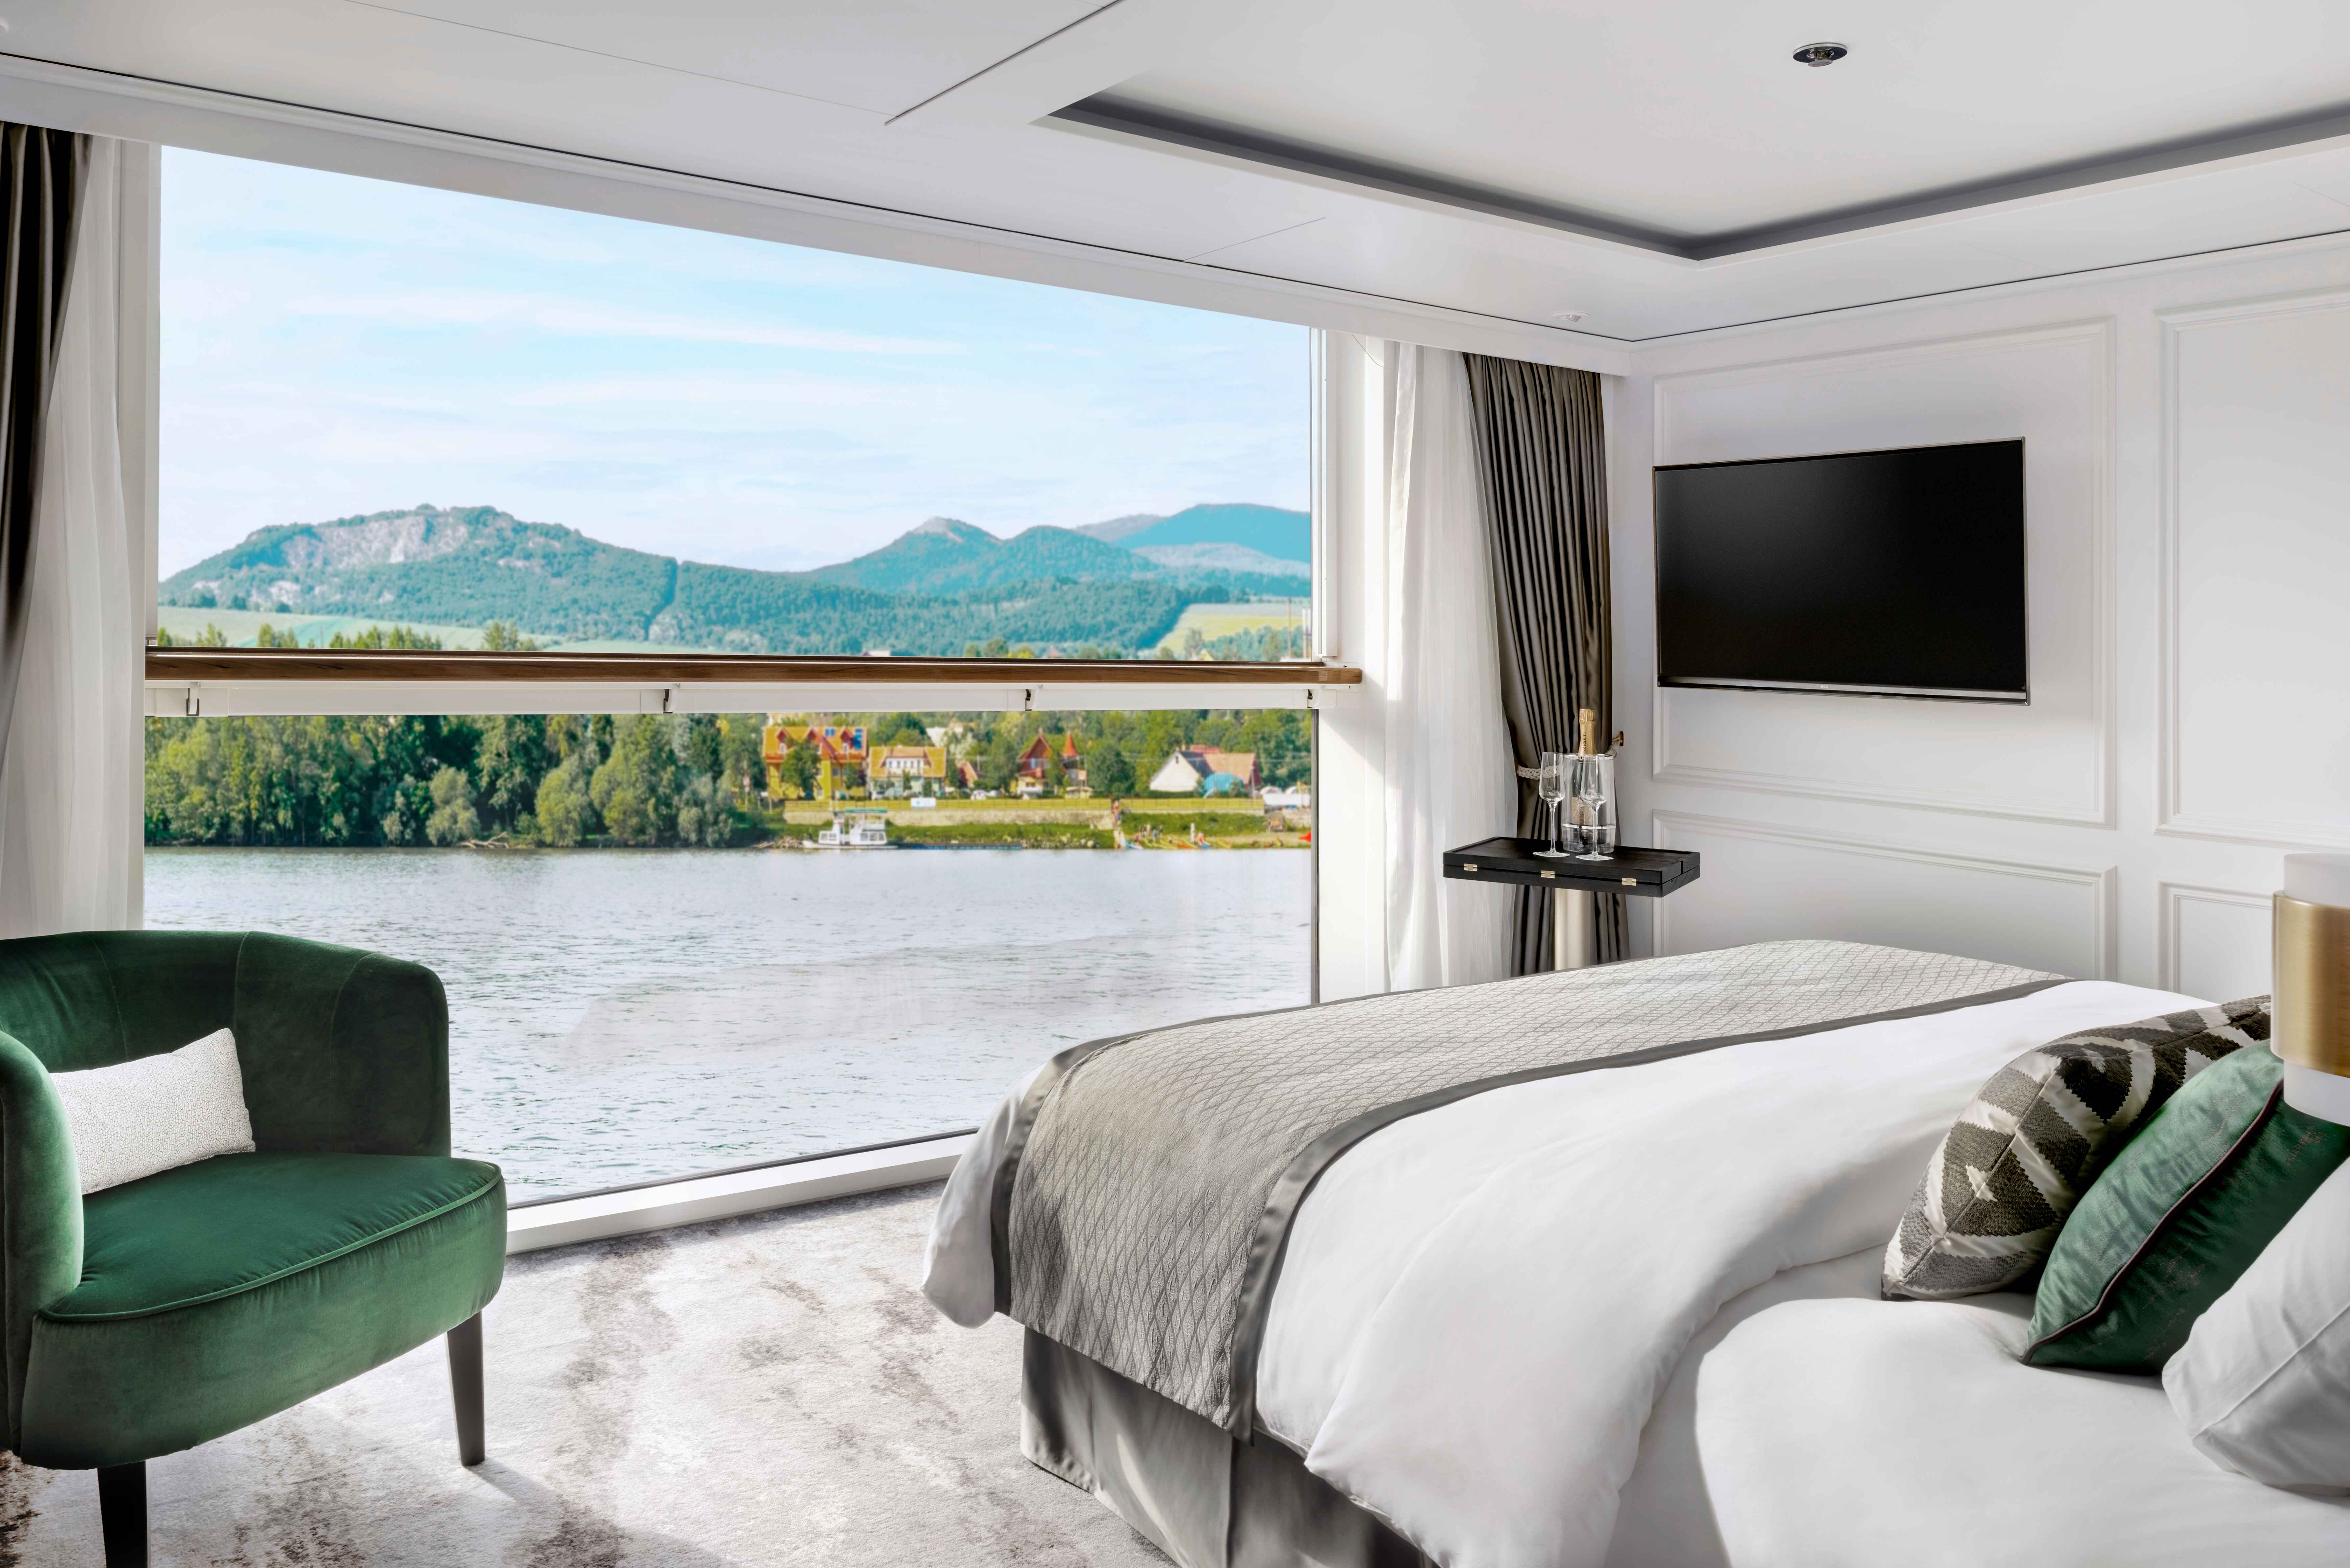 Sail in Style Europe with Uniworld, Set Sail in Style in Europe with Uniworld Boutique River Cruises